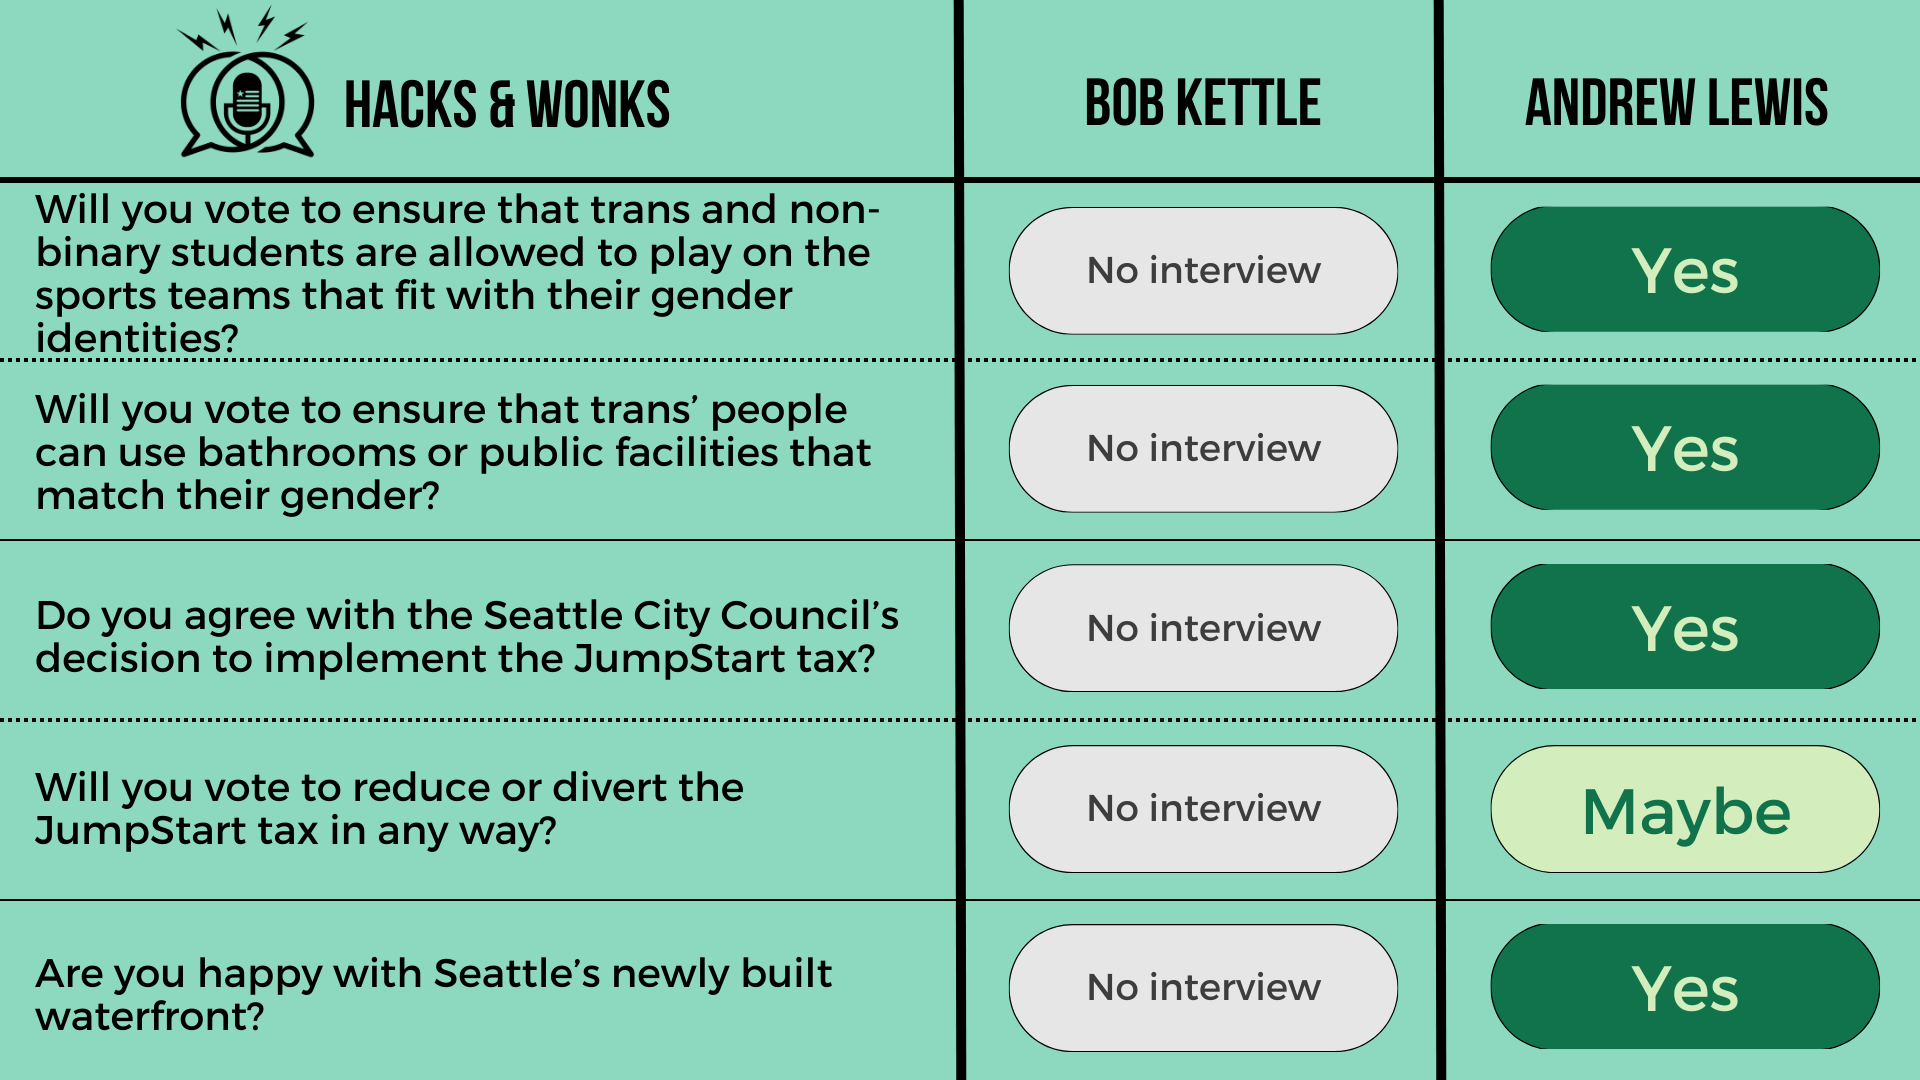 Q: Will you vote to ensure that trans and non-binary students are allowed to play on the sports teams that fit with their gender identities? Bob Kettle: No interview, Andrew Lewis: Yes  Q: Will you vote to ensure that trans’ people can use bathrooms